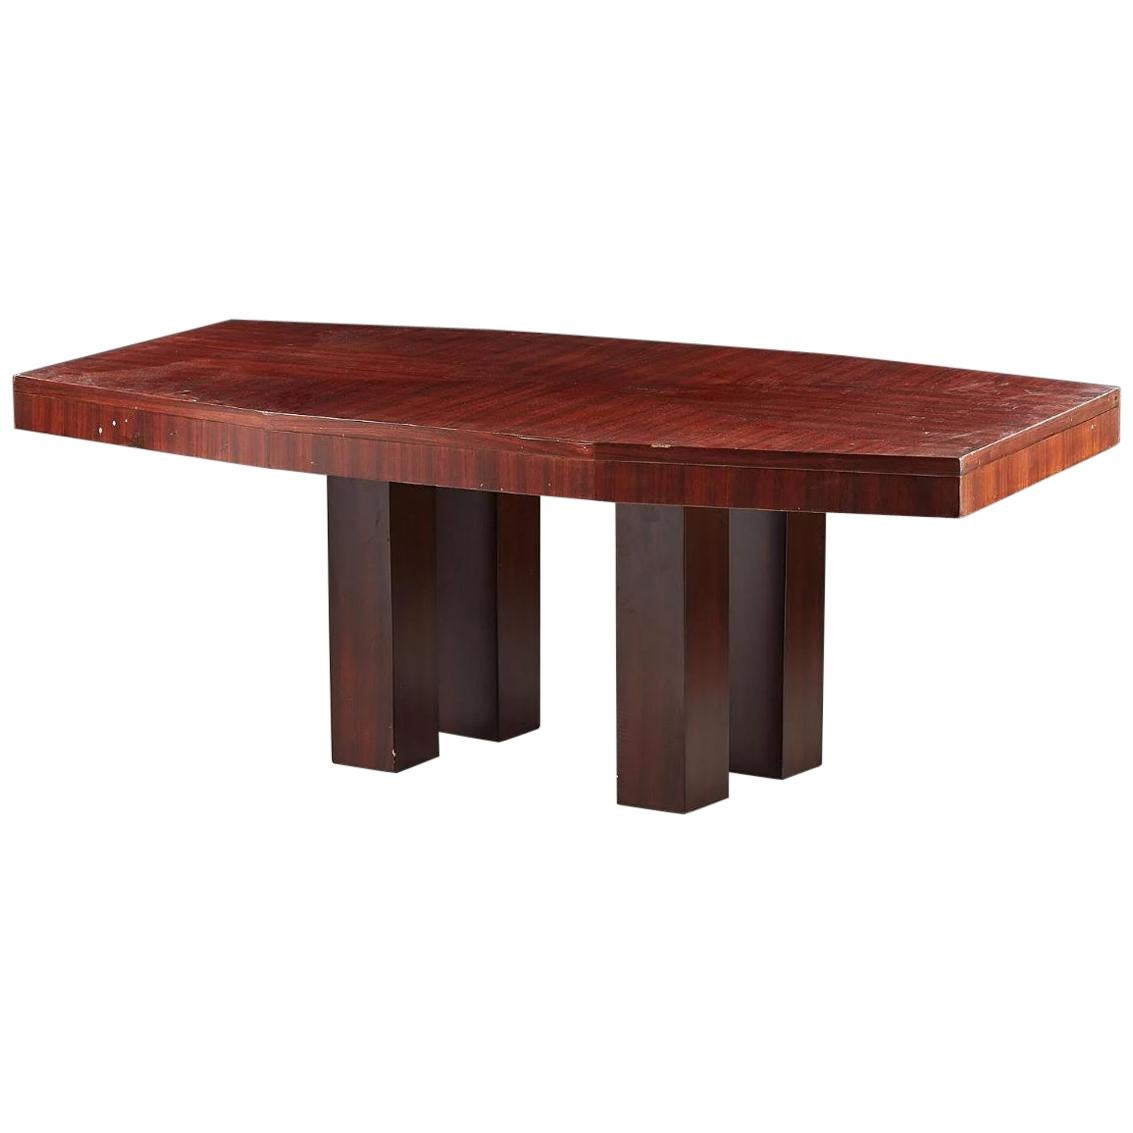 Modernist Art Deco Table circa 1930-1940 Attributed to Jacques Adnet